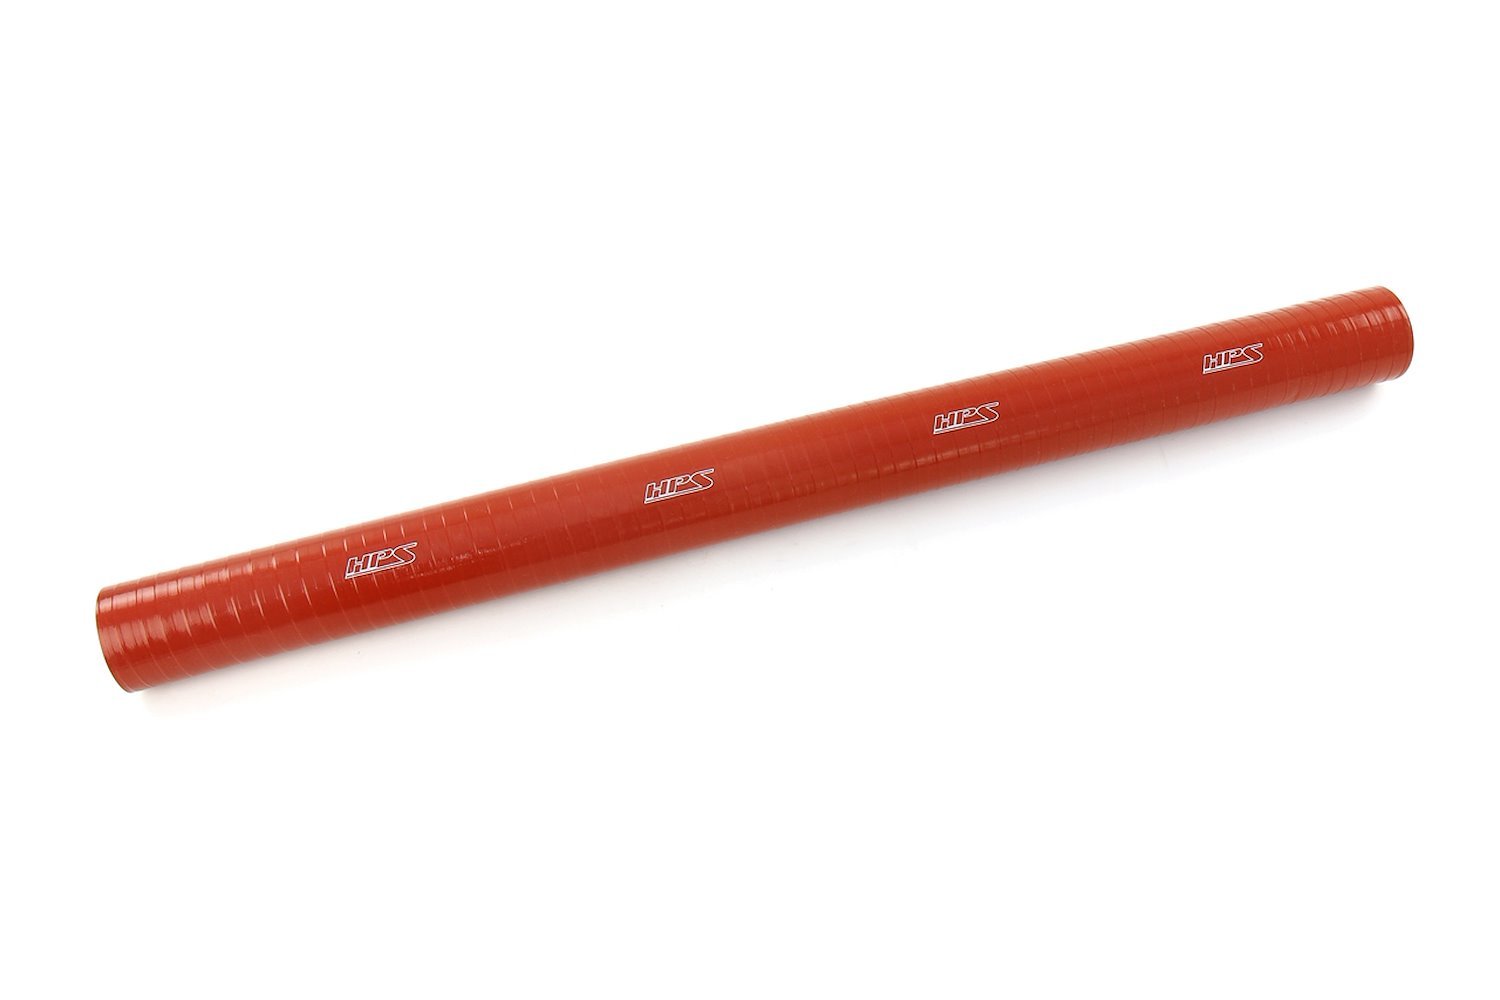 ST-3F-275-HOT Silicone Coolant Tube, Ultra High-Temp 4-Ply Reinforced, 2-3/4 in. ID, 3 ft. Long